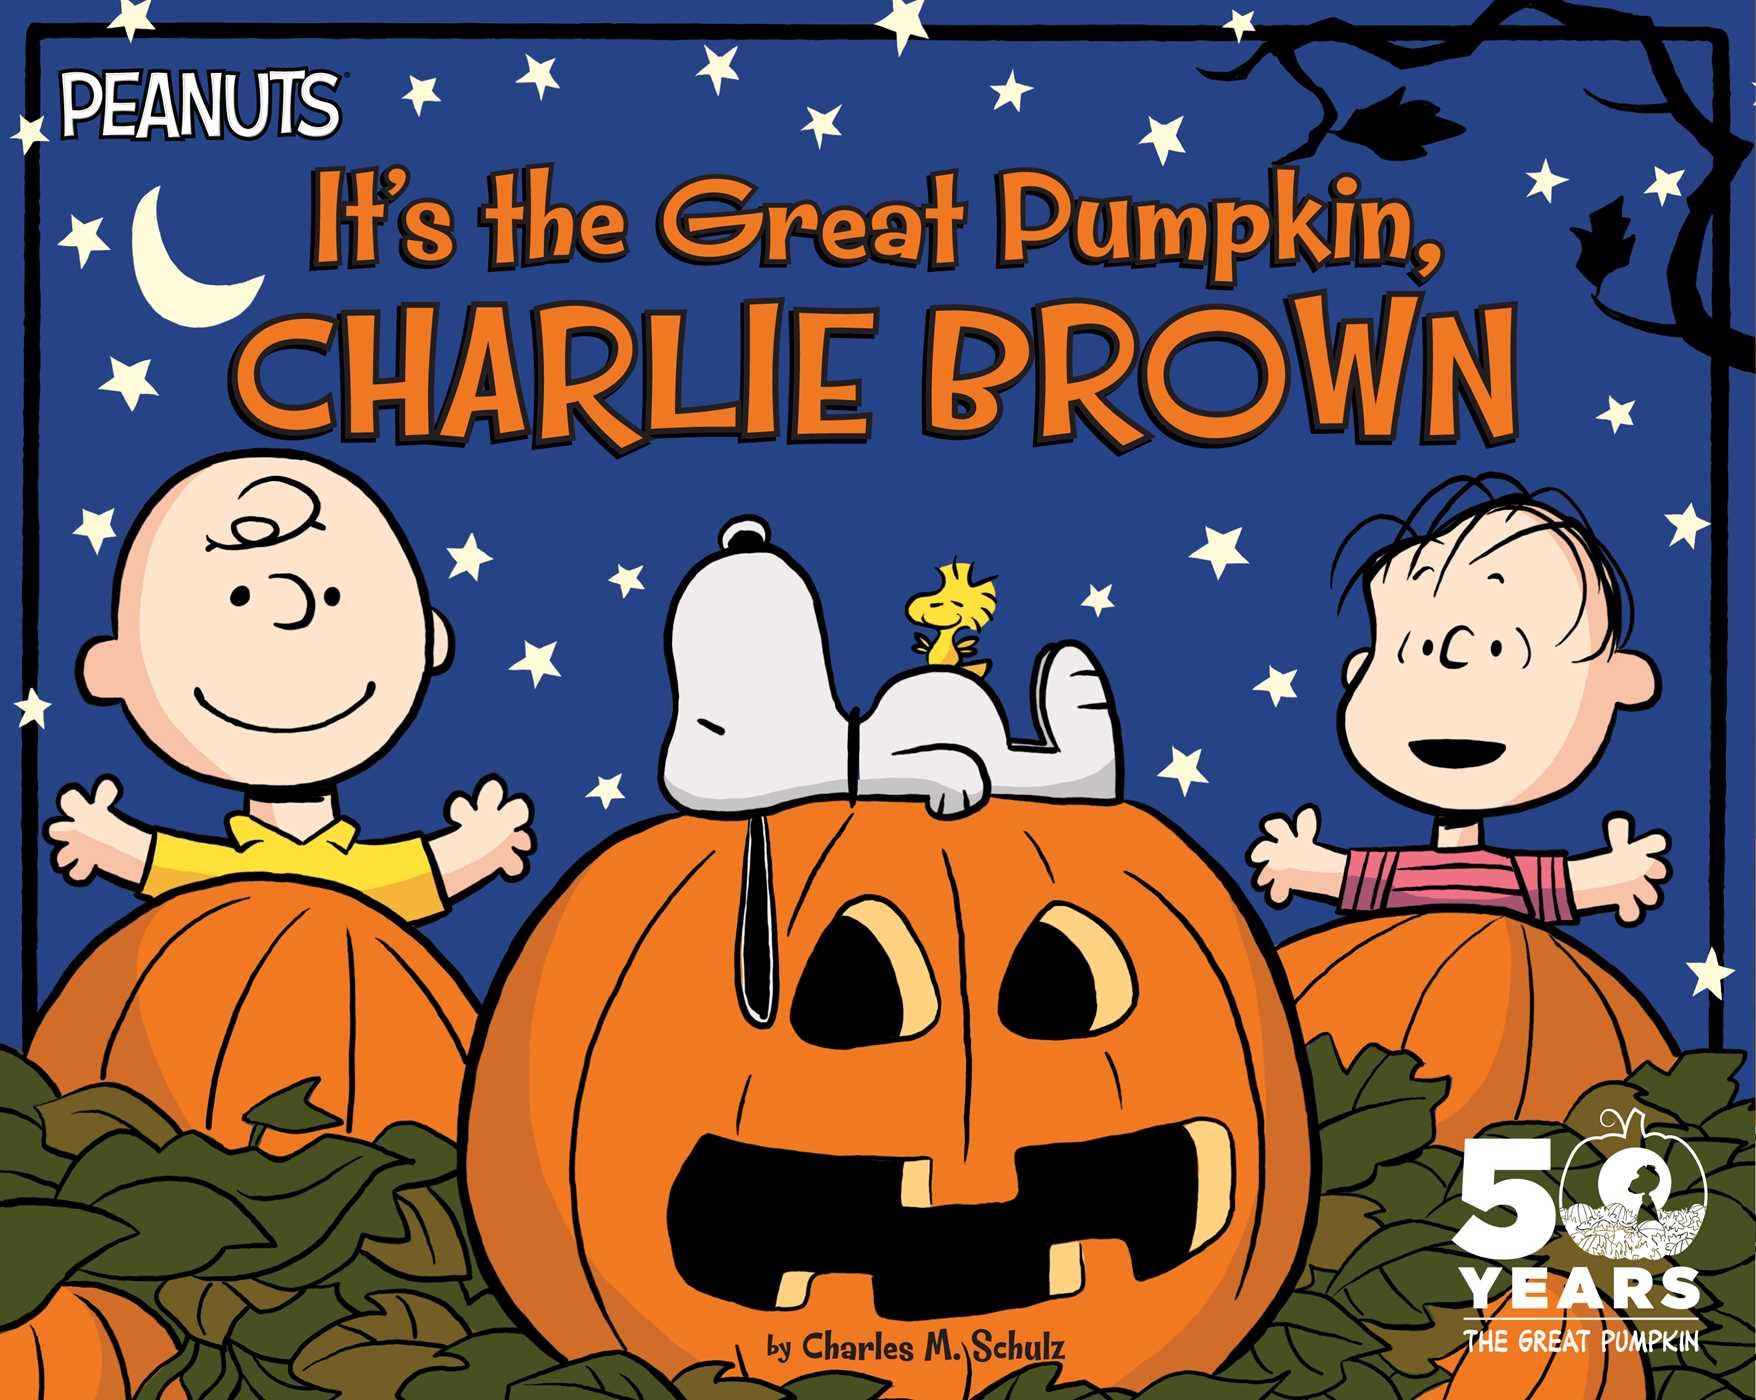 It’s the great pumpkin, Charlie Brown